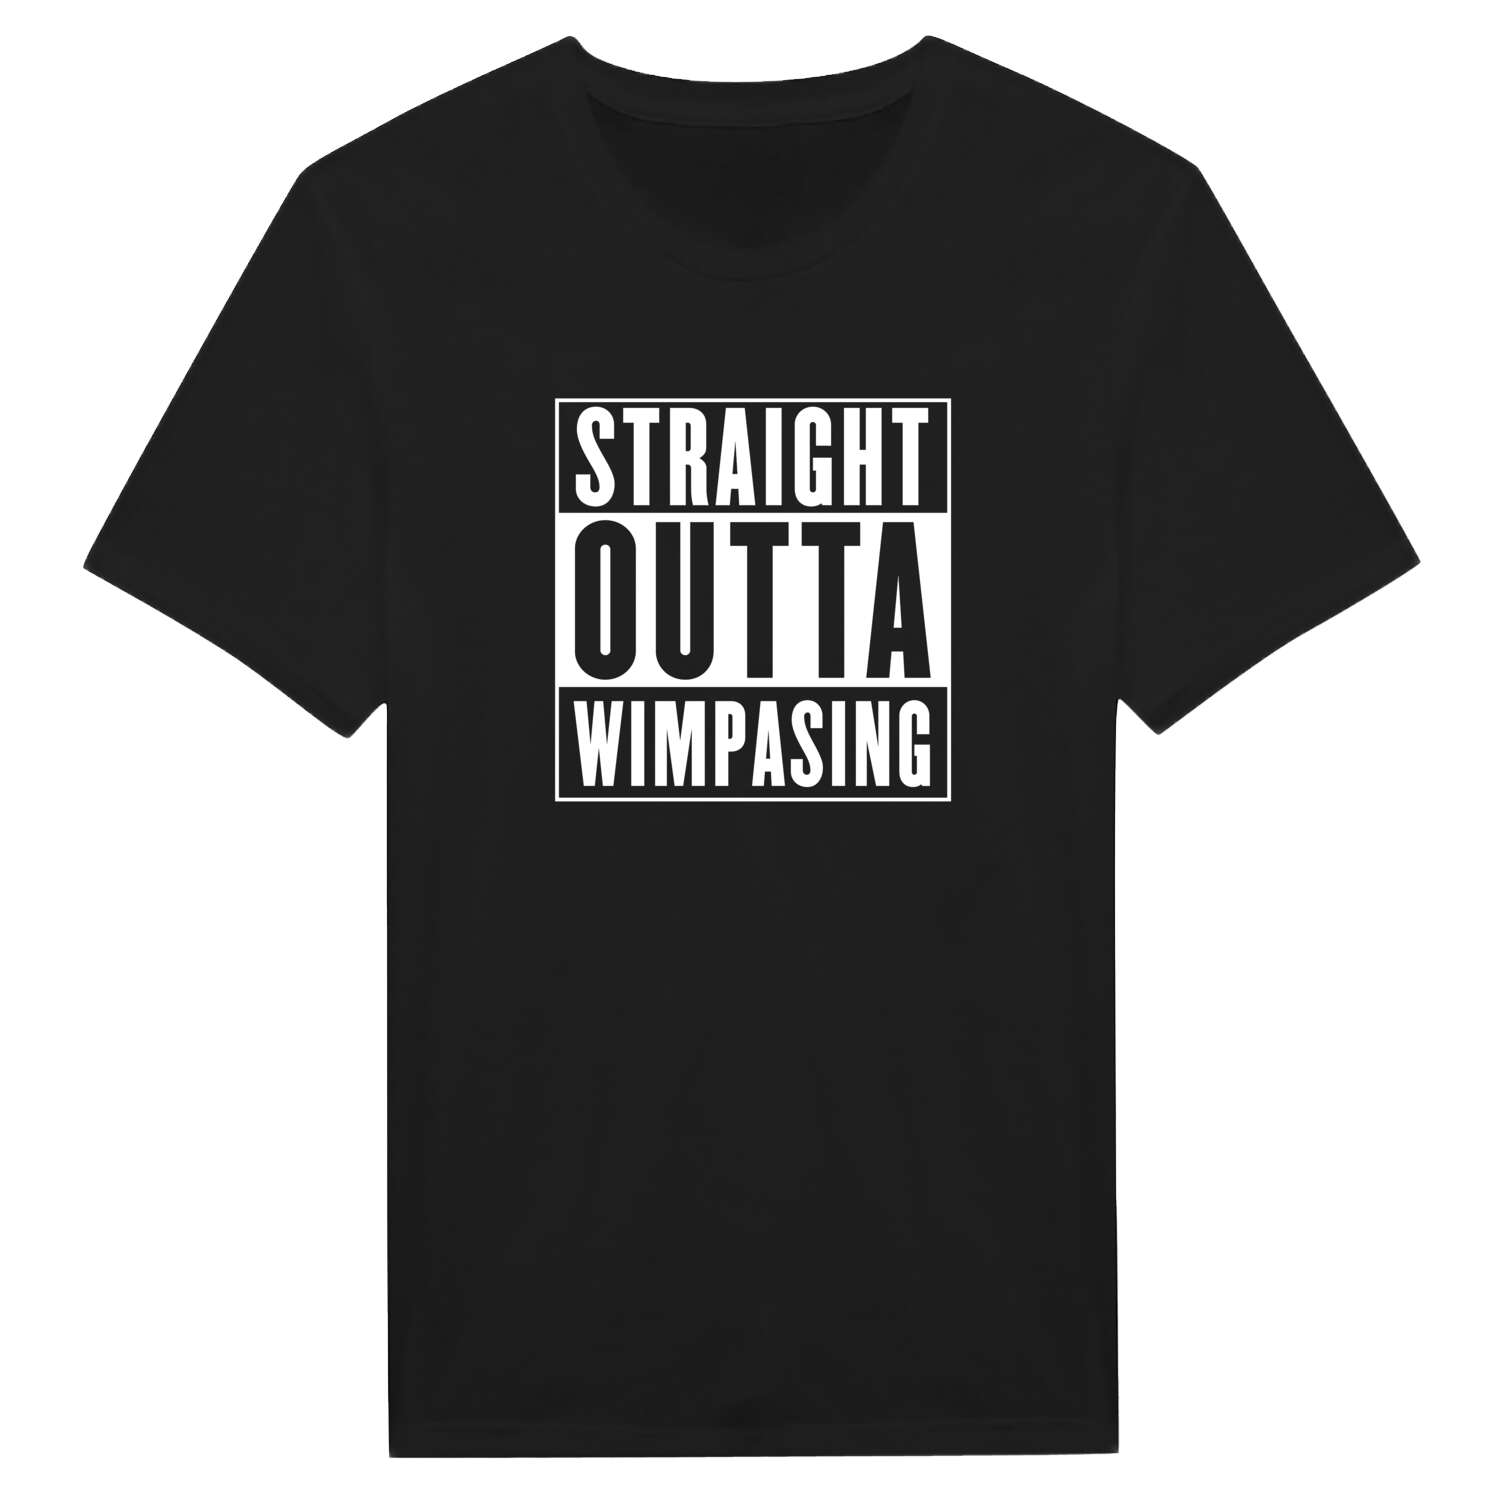 Wimpasing T-Shirt »Straight Outta«